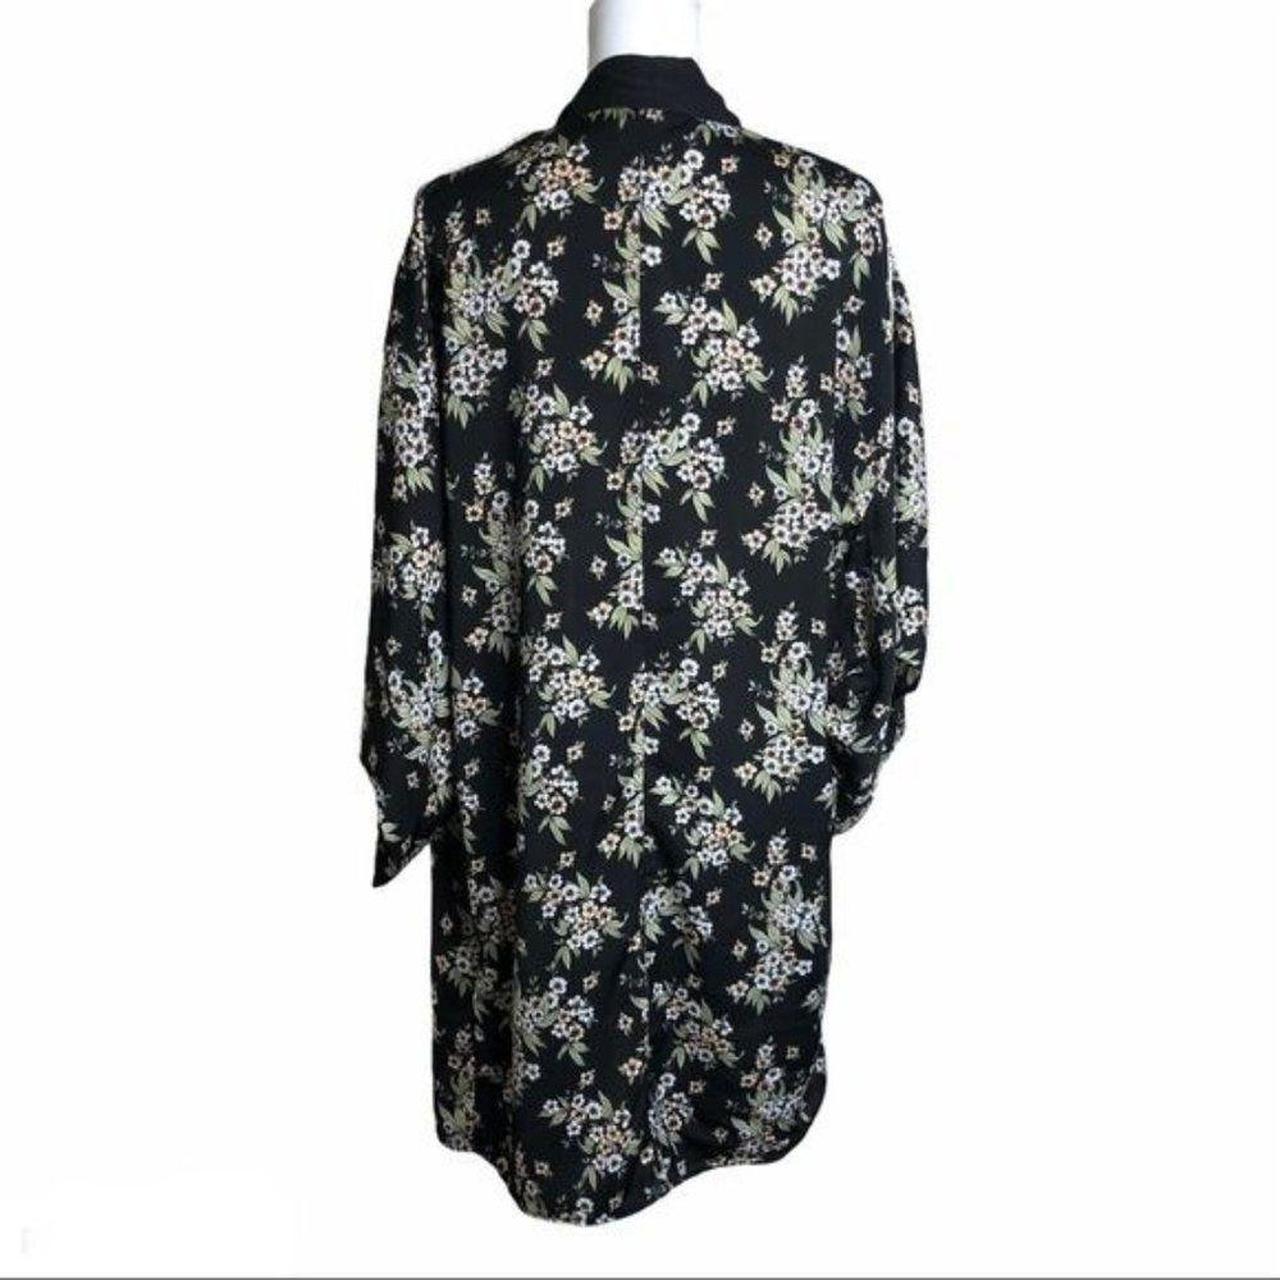 Product Image 4 - Forever 21 Floral Kimono Small

Pre